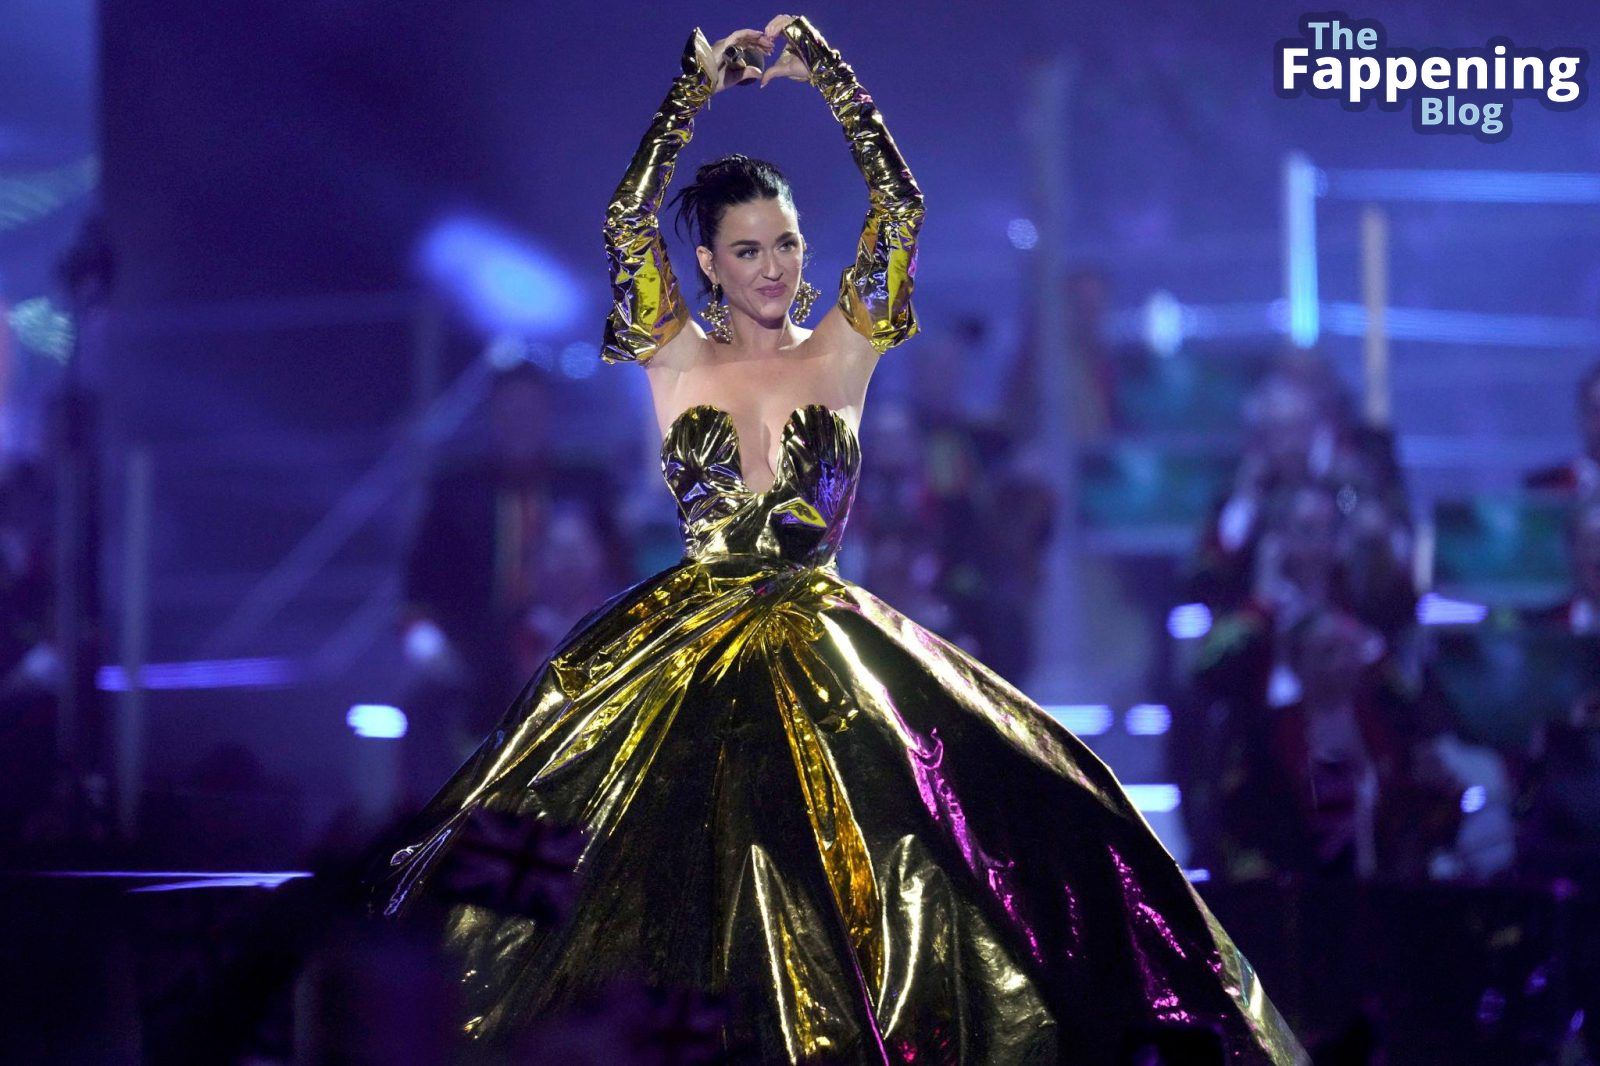 katy-perry-braless-boobs-cleavage-coronation-concert-windsor-35-1-thefappeningblog.com_.jpg